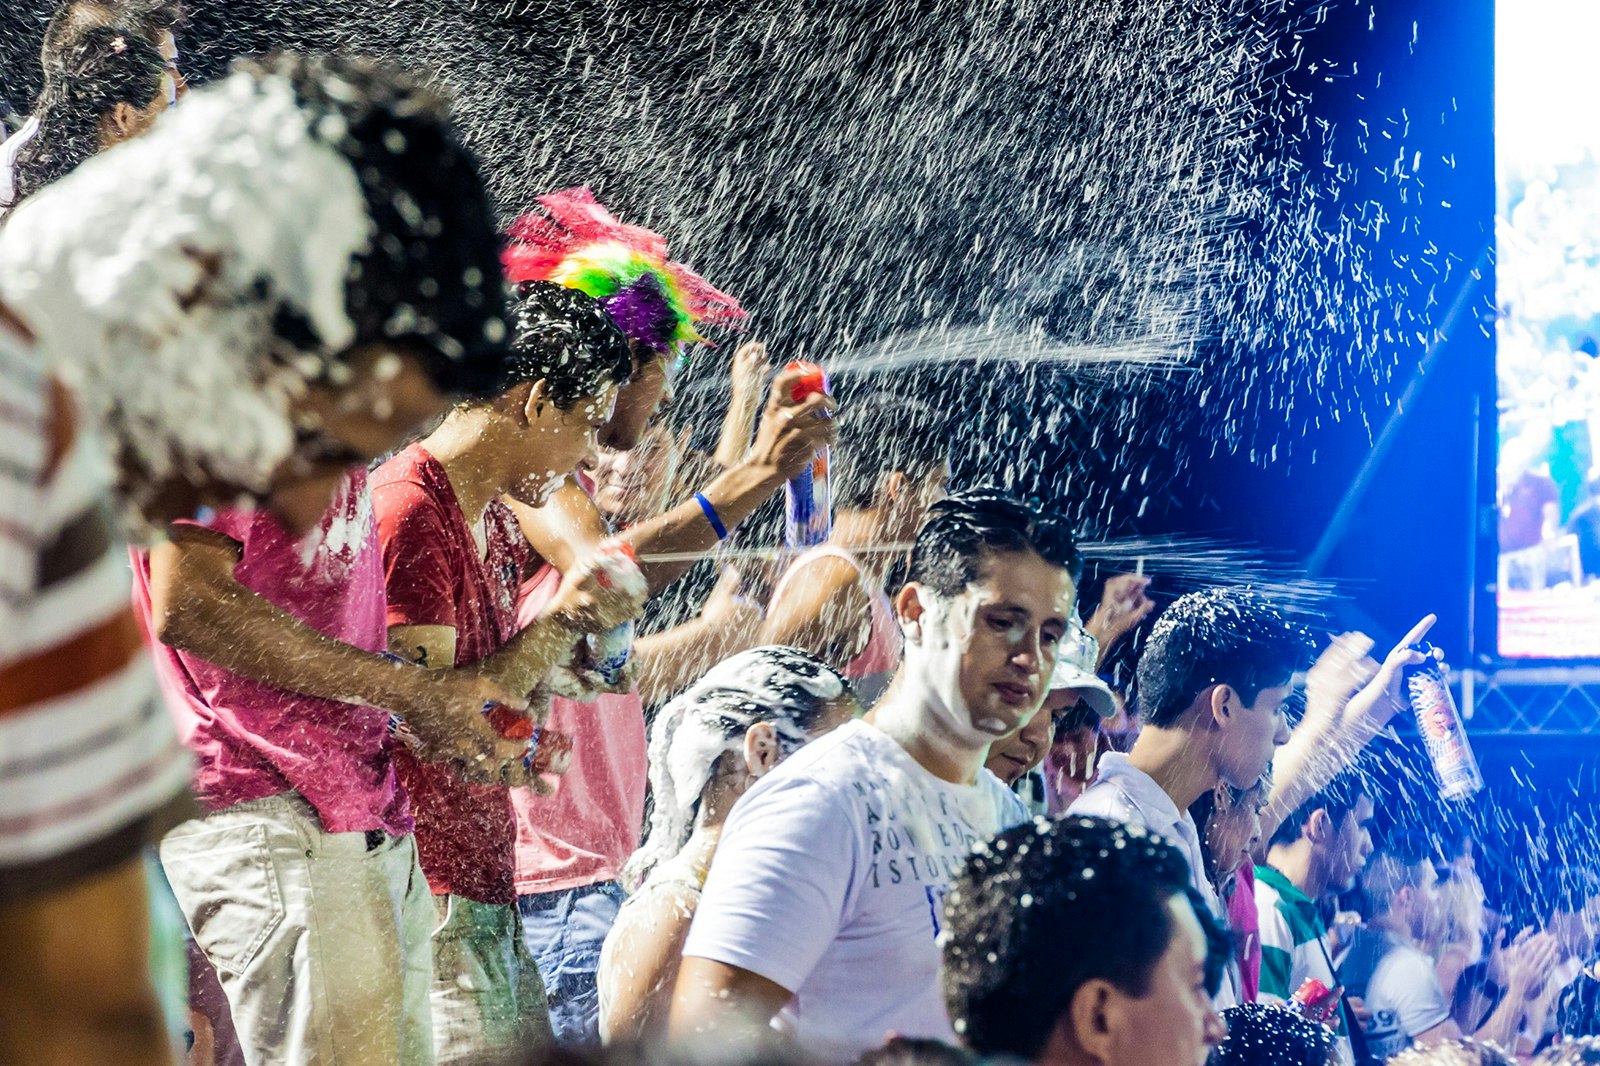 A group of people spray cans of fake snow in the air, covering those nearby 